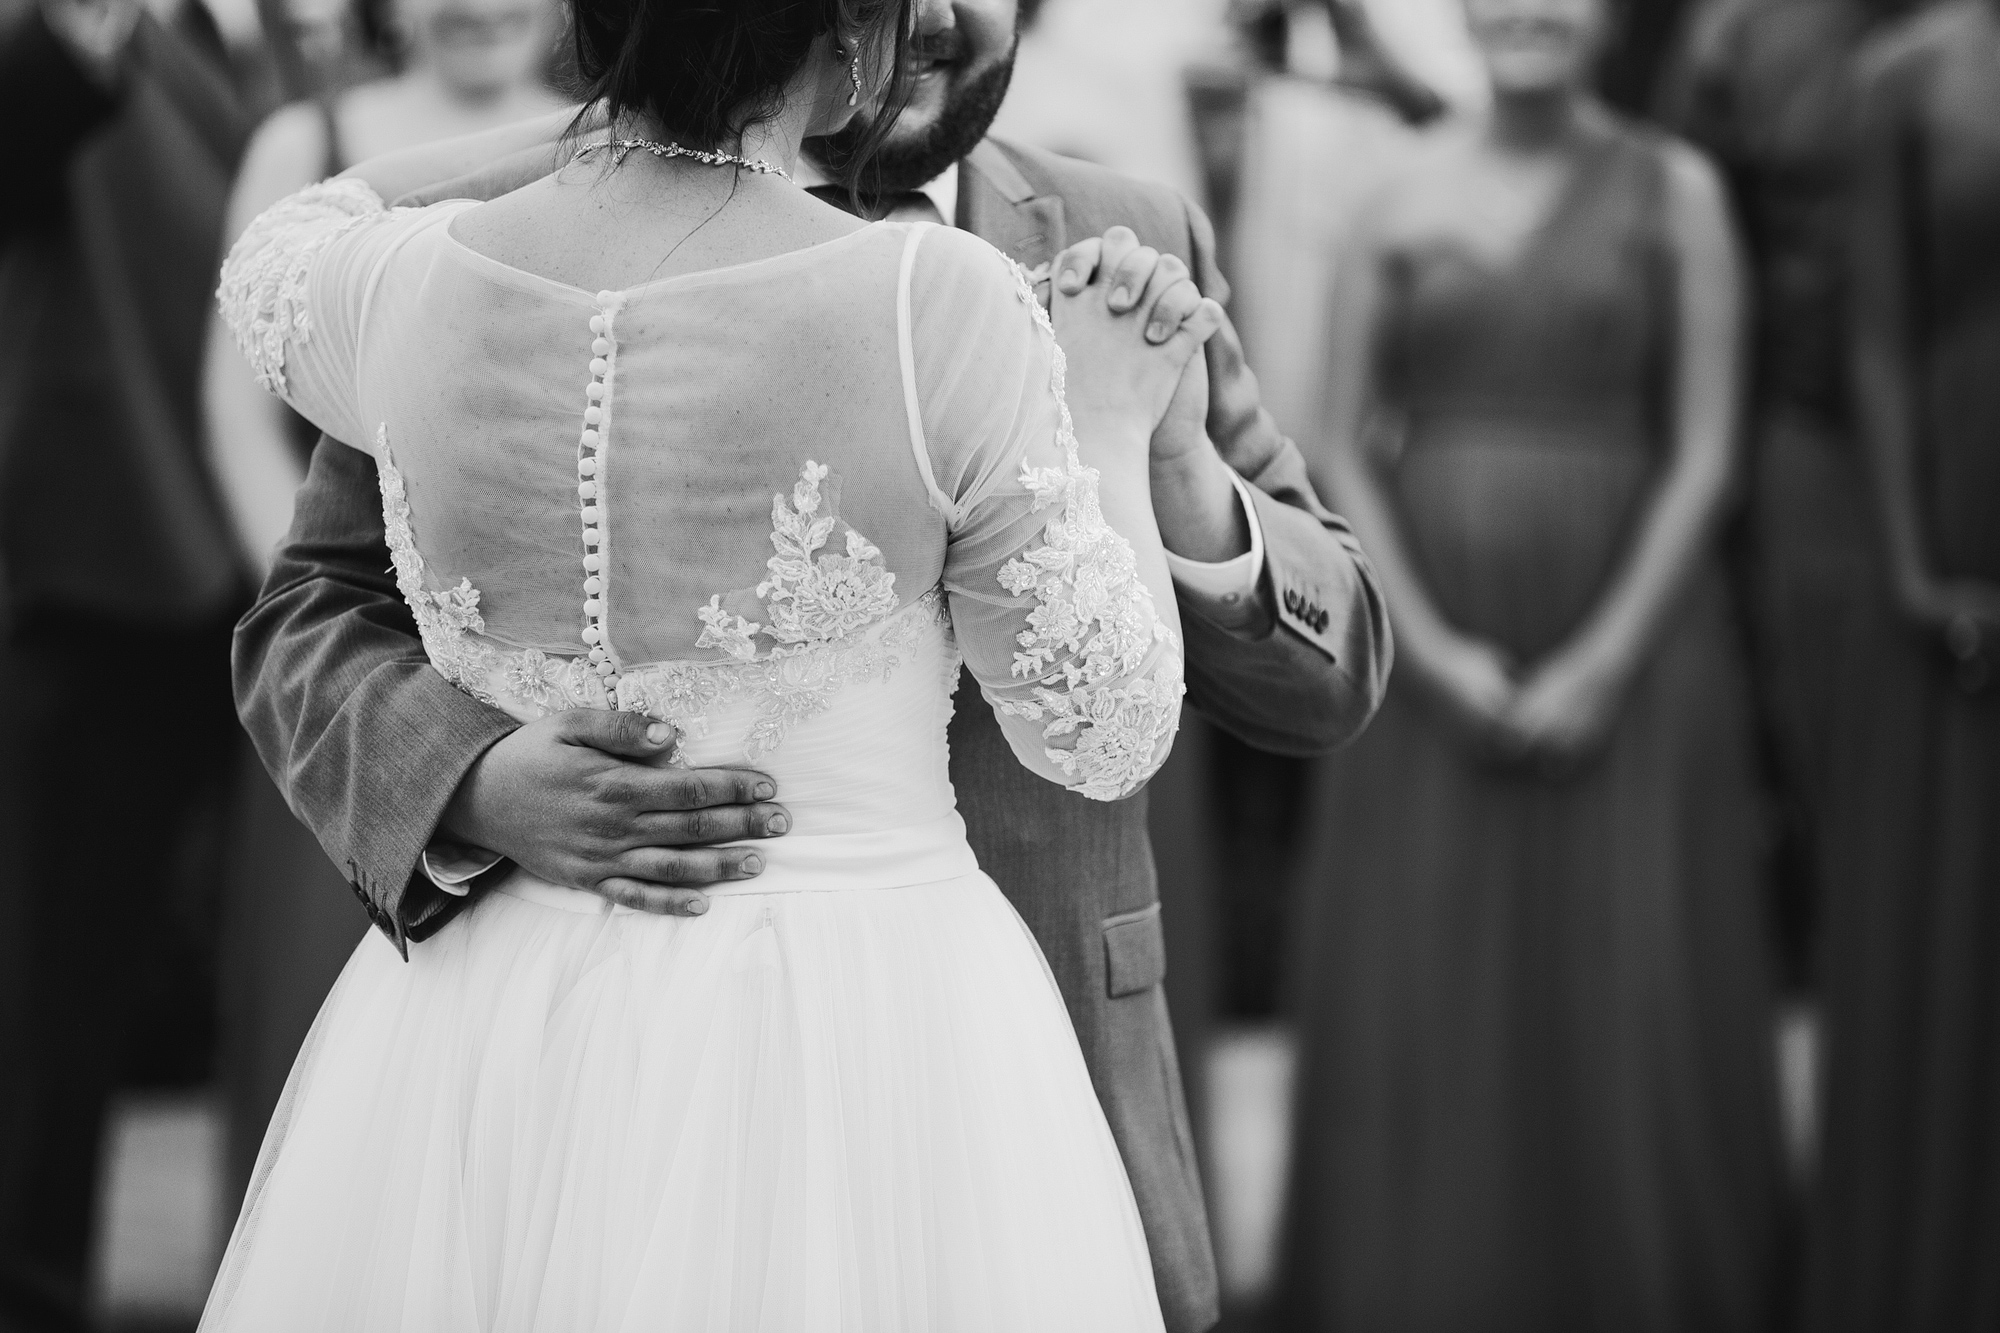 A sweet photo of the first dance. 